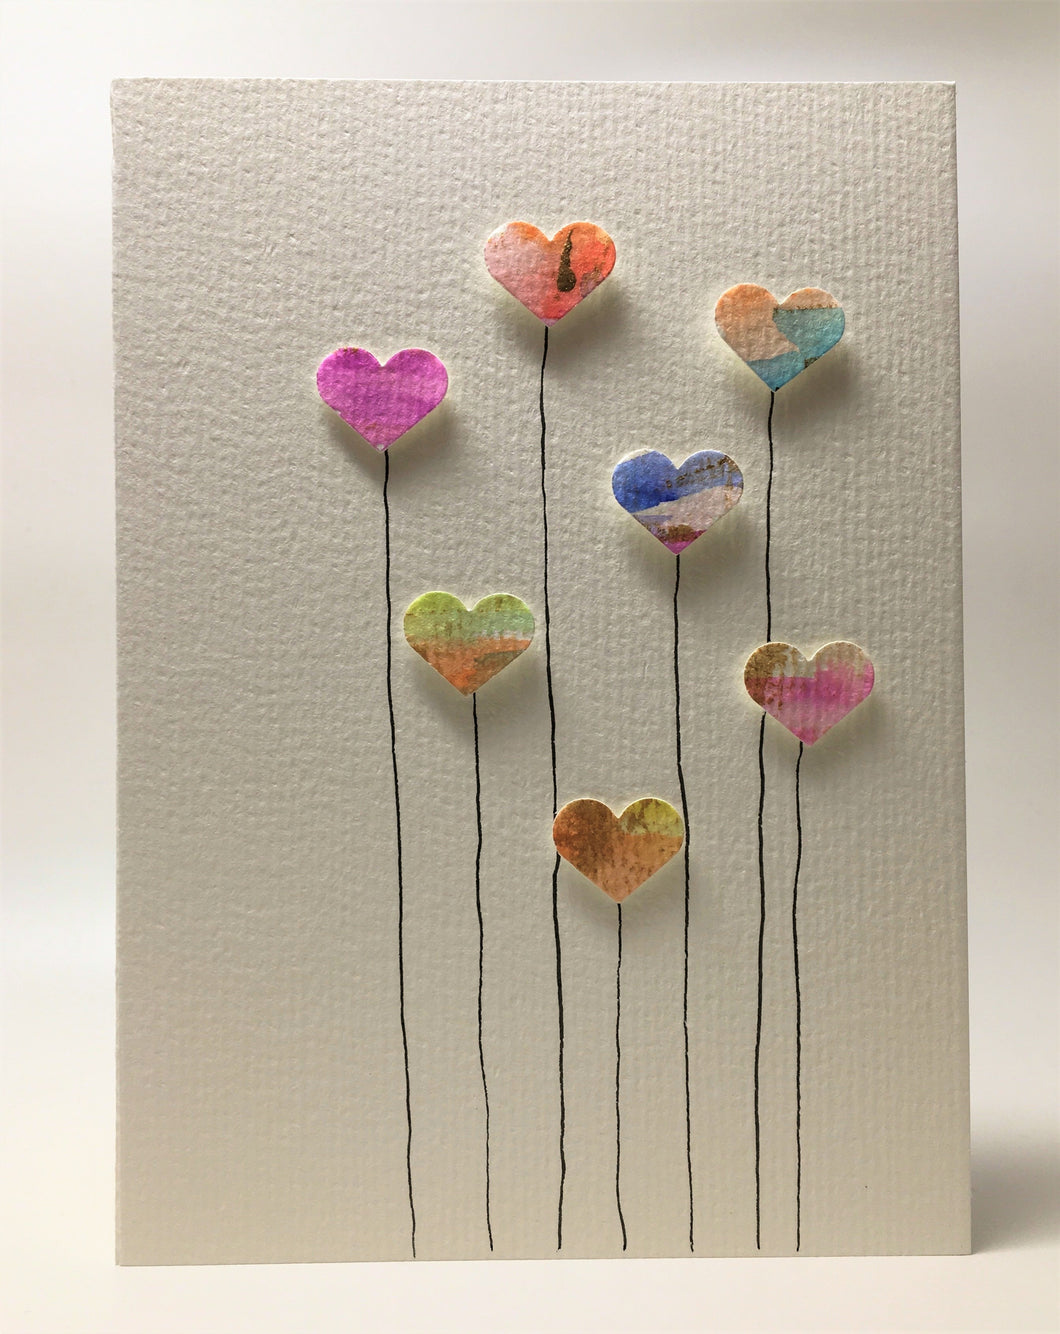 Original Hand Painted Greeting Card - Seven Abstract Heart Flowers - eDgE dEsiGn London